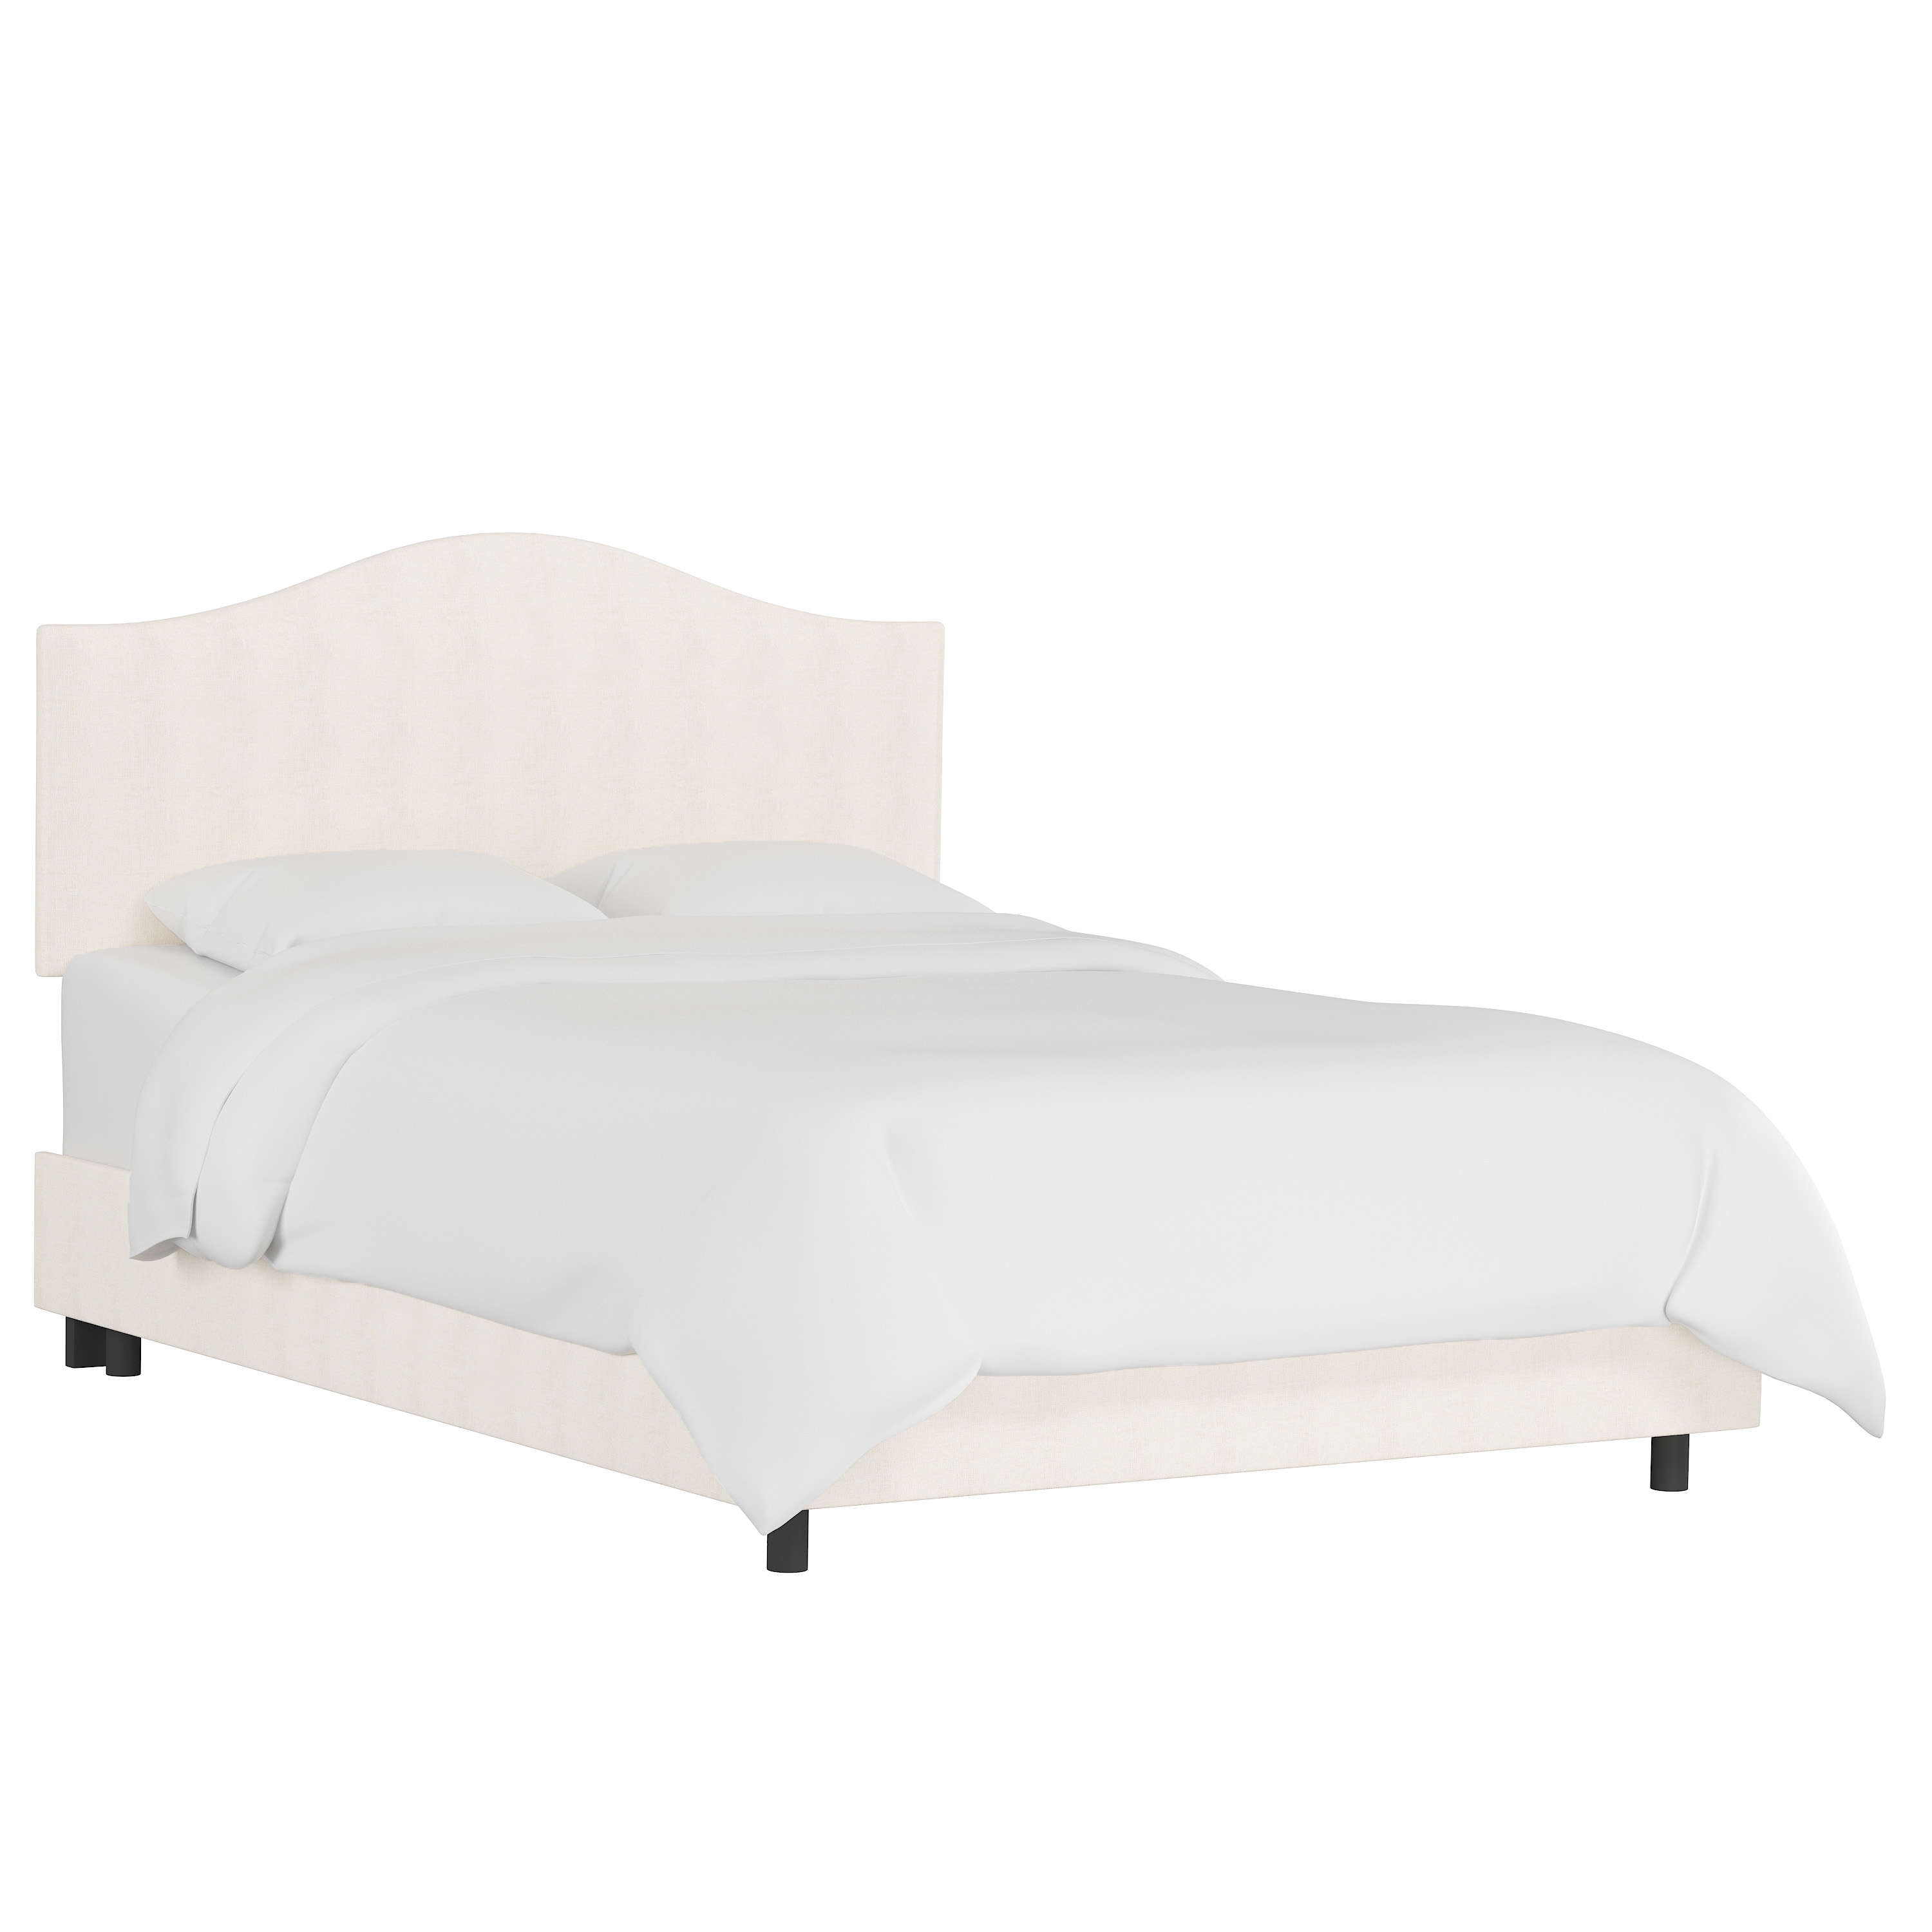 King Kenmore Bed in Zuma White - Image 0